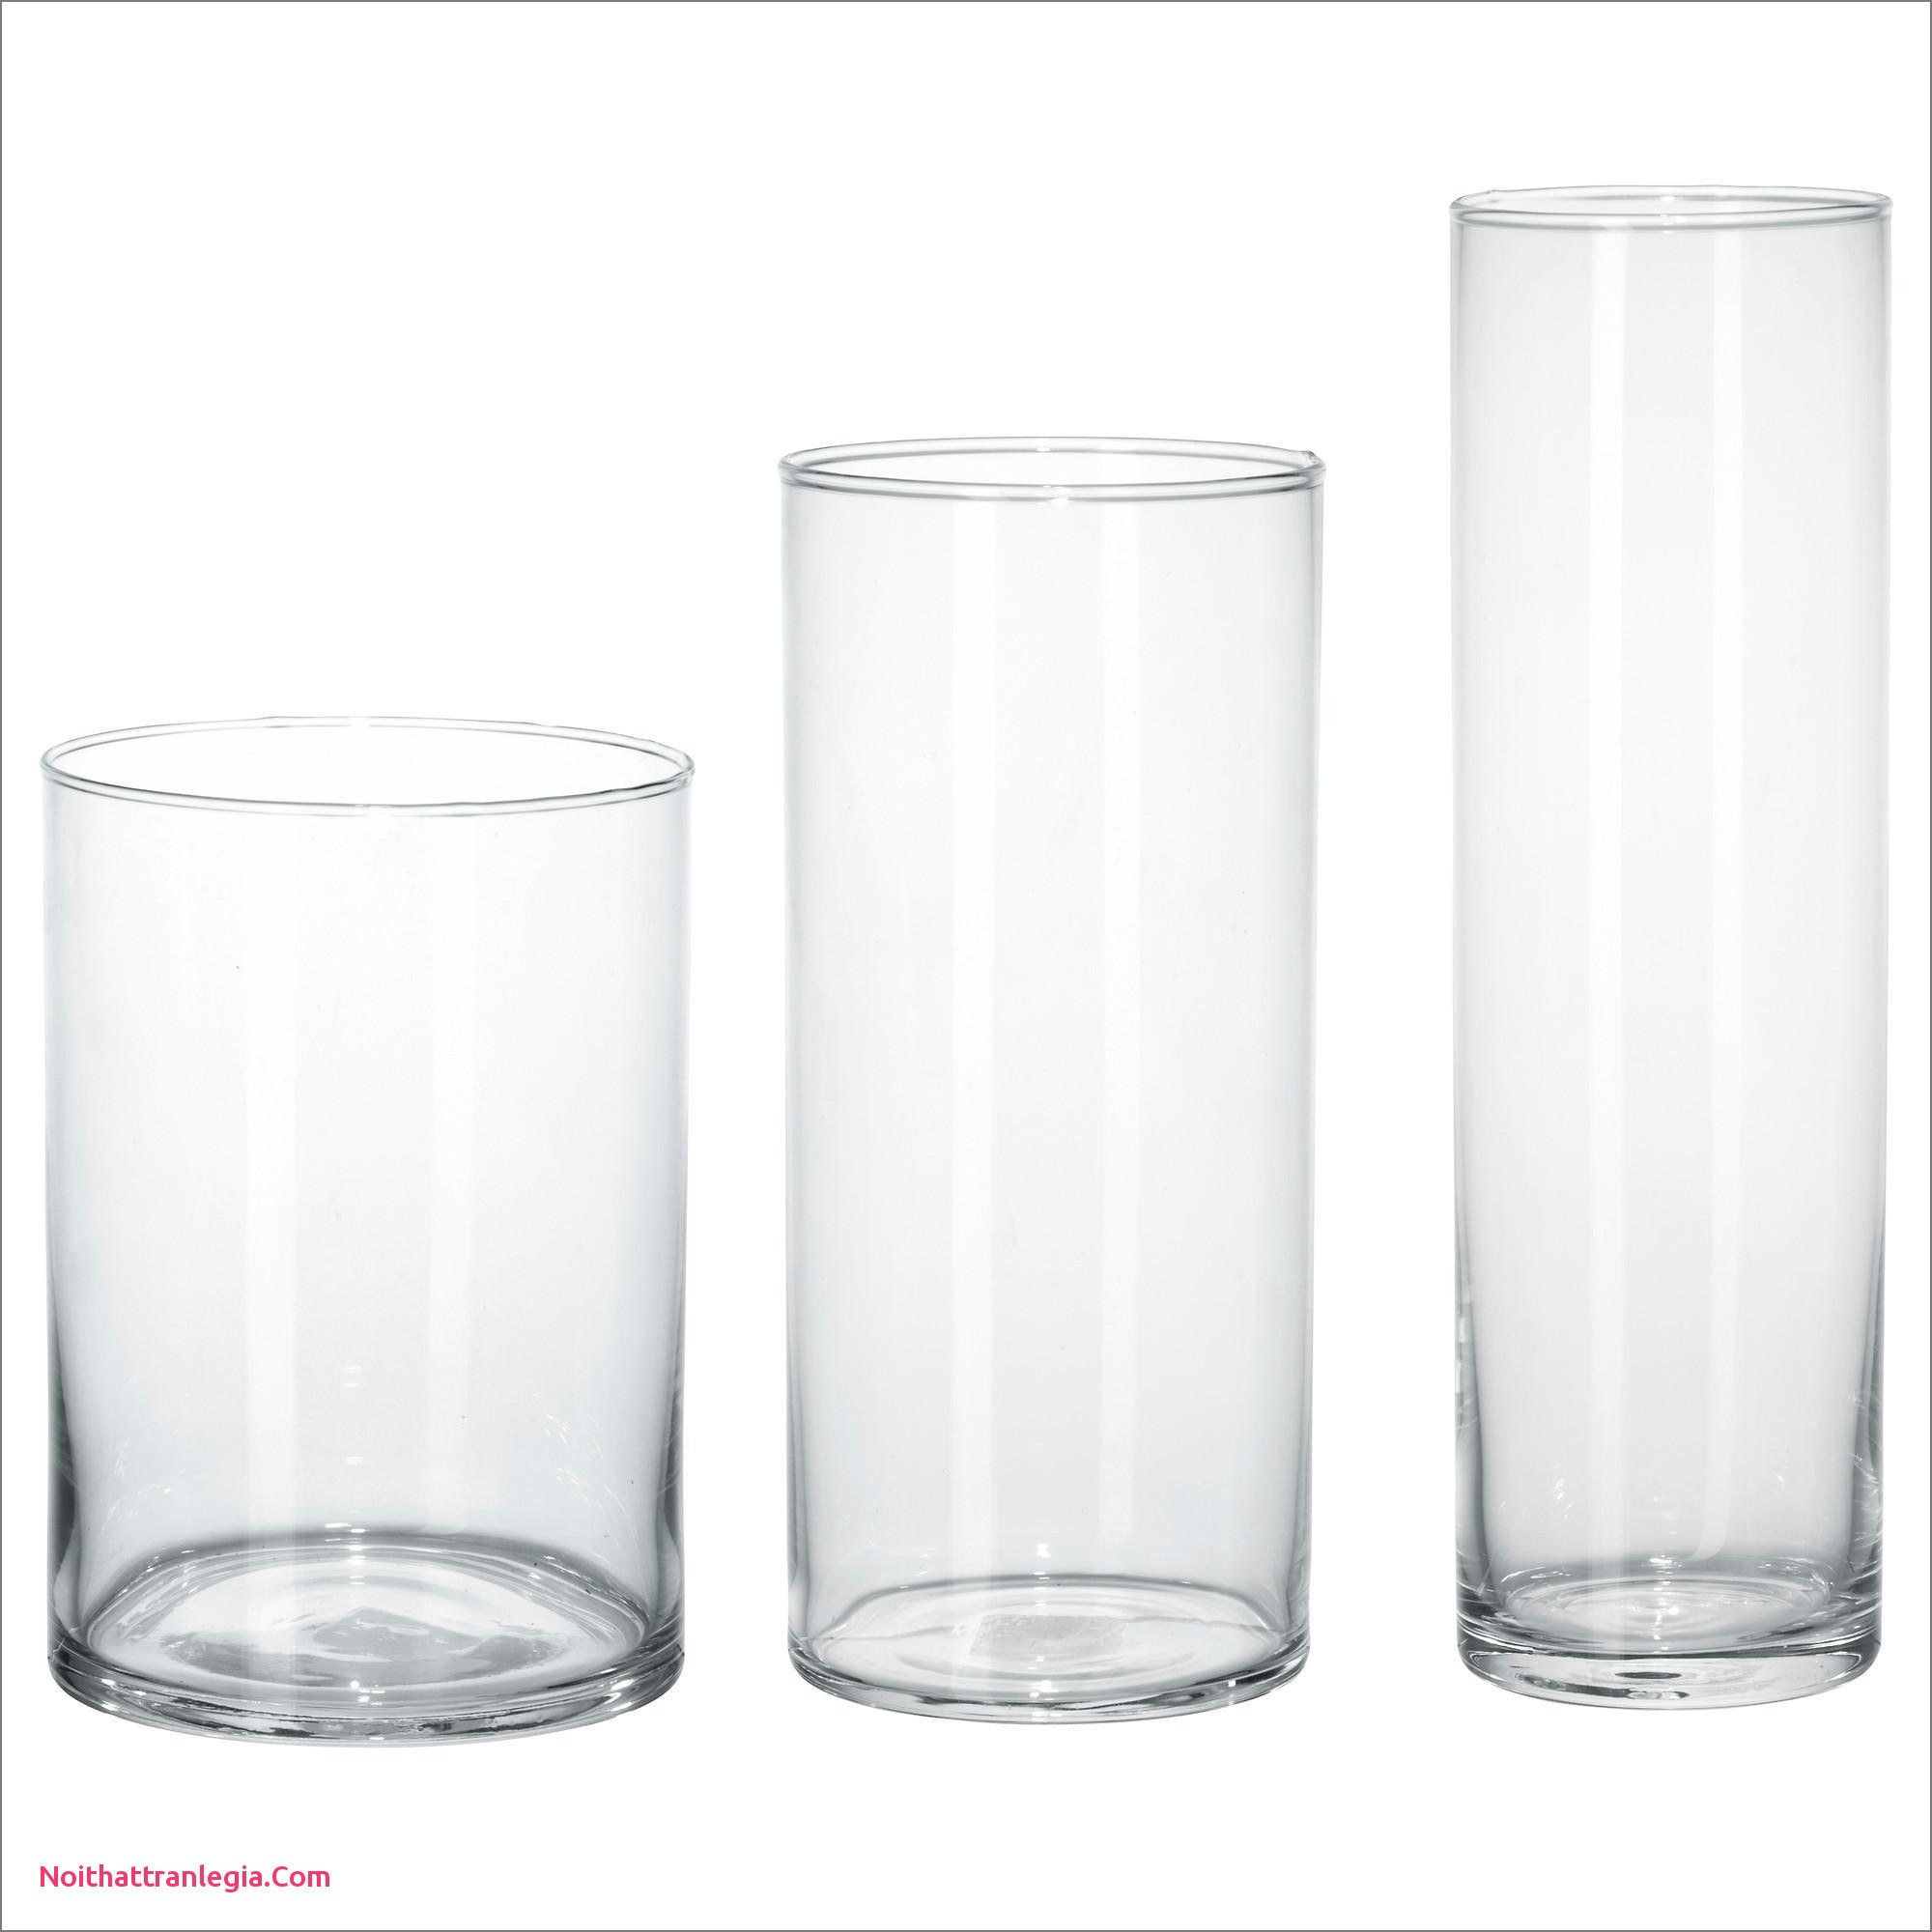 13 Fashionable Extra Large Clear Vase 2024 free download extra large clear vase of 20 large floor vase nz noithattranlegia vases design with regard to home design elegant floor vase ikea floor vase ikea fresh badregal ikea inspirierend living room